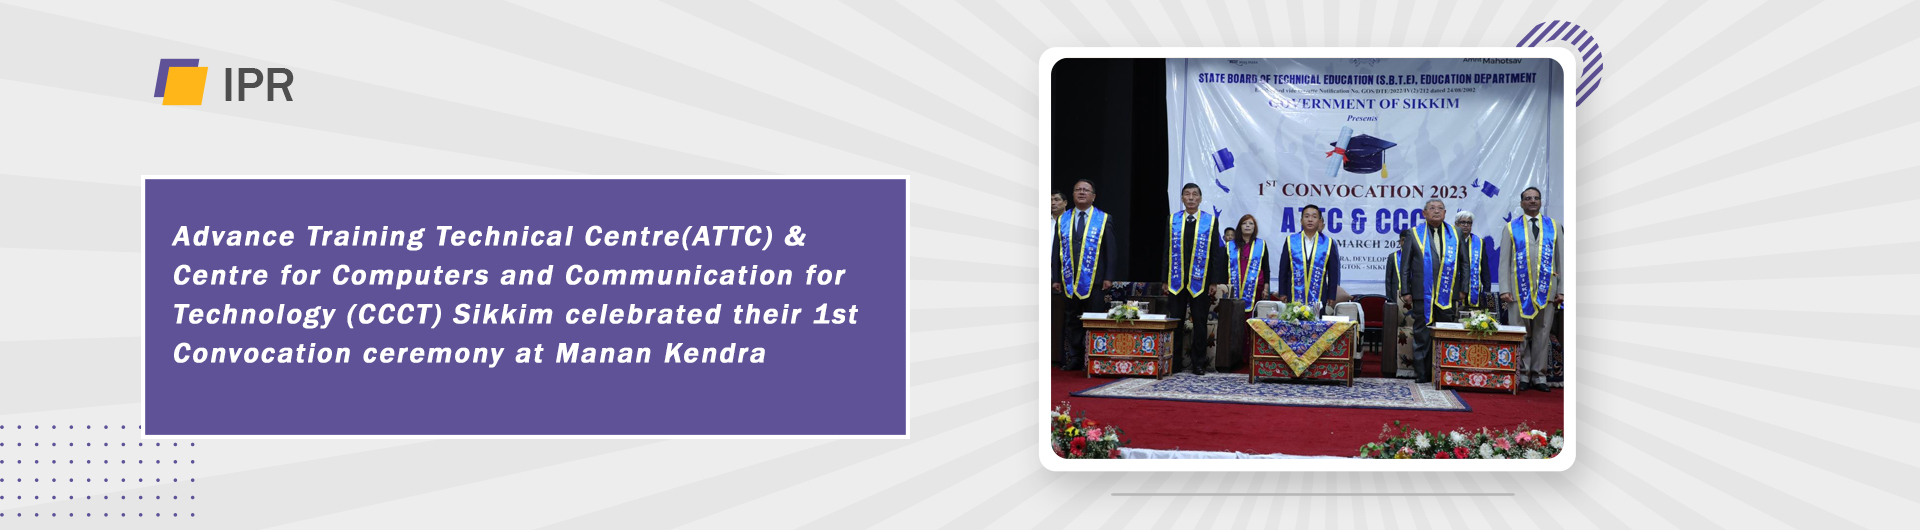 Advance Training Technical Centre(ATTC) & Centre for Computers and Communication for Technology (CCCT) Sikkim celebrated their 1st Convocation ceremony at Manan Kendra